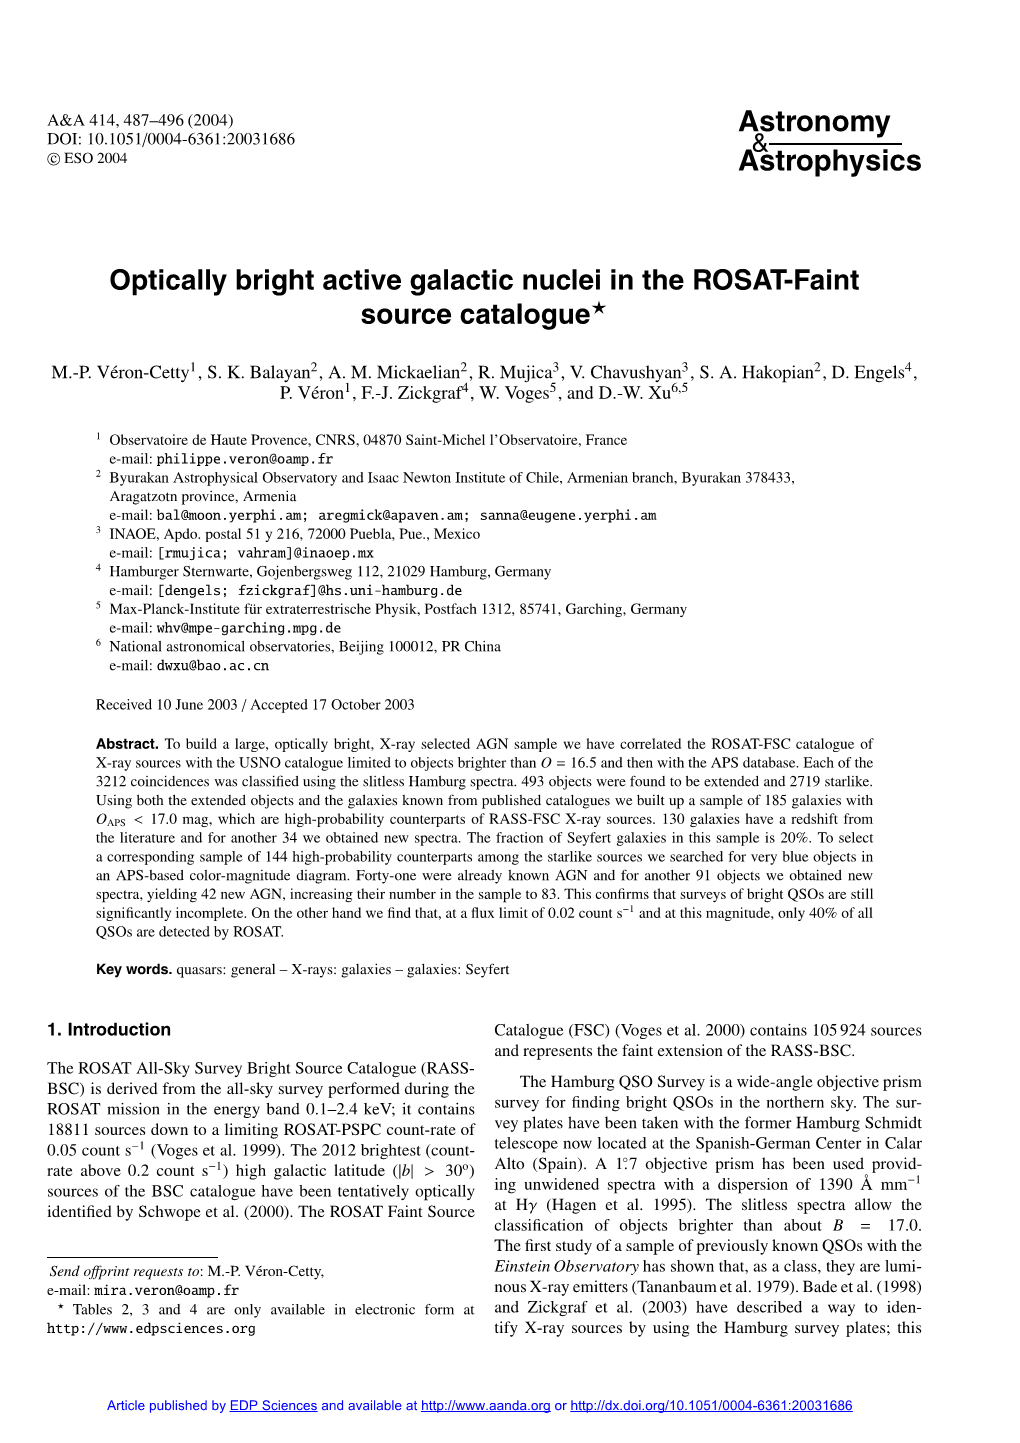 Optically Bright Active Galactic Nuclei in the ROSAT-Faint Source Catalogue